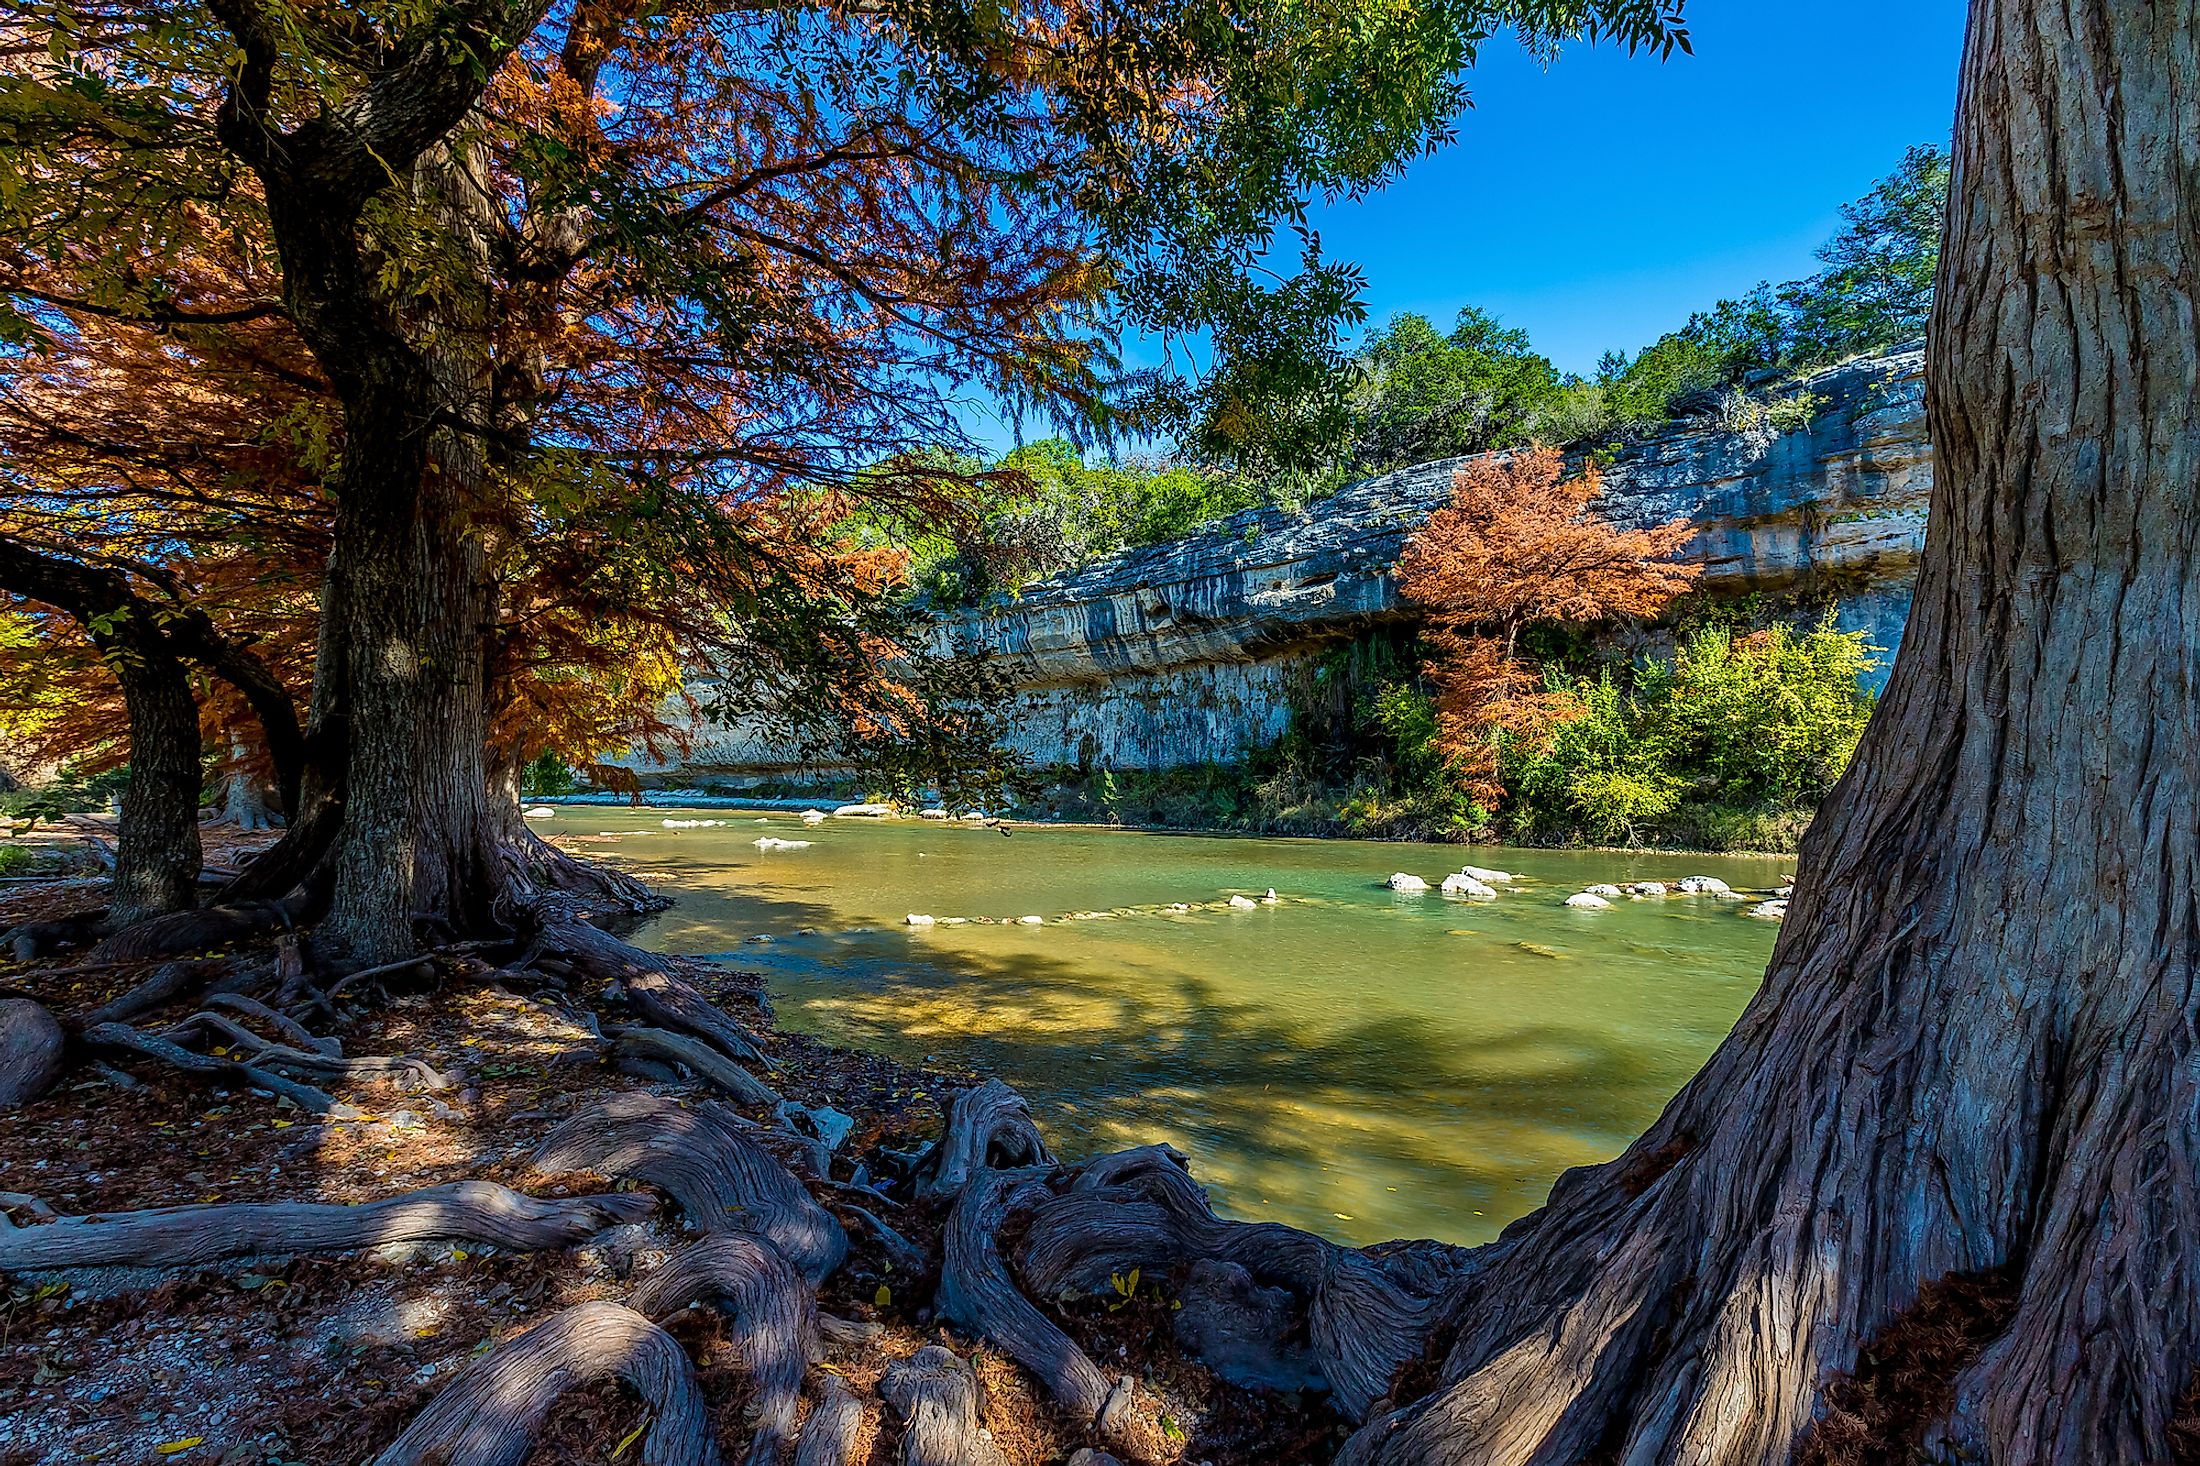 Cypress Trees in the Shade of Bright Orange Fall Foliage at Guadalupe State Park, Texas.